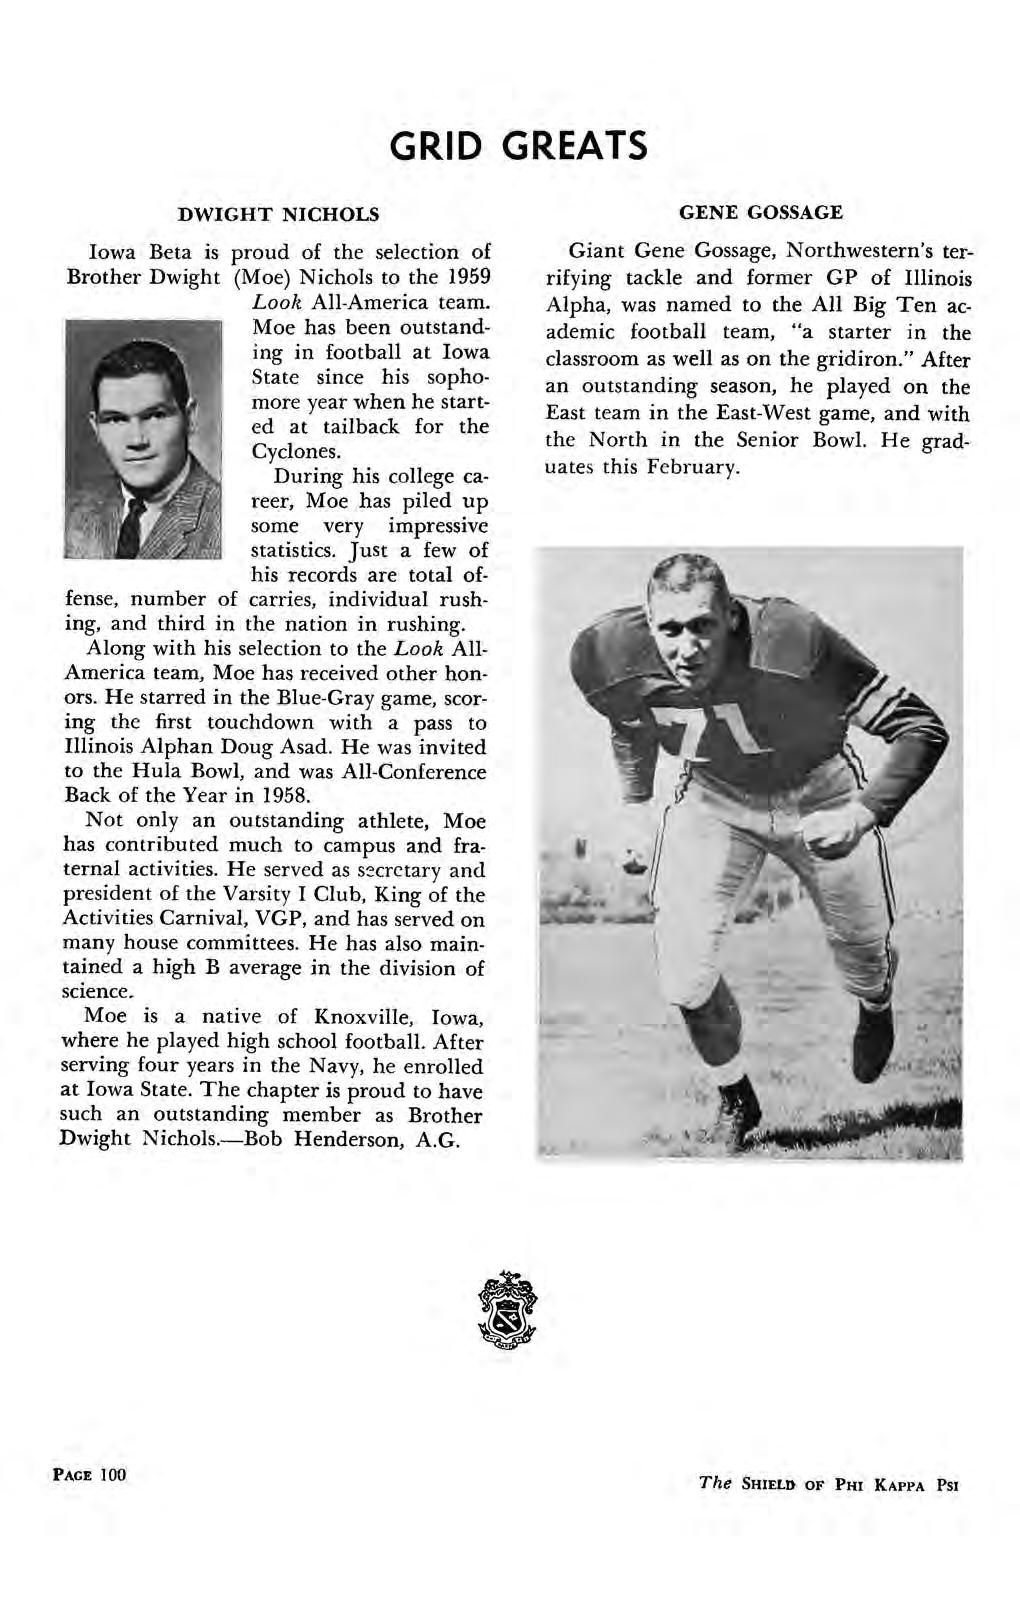 GRID GREATS Iowa Beta is Brother Dwight DWIGHT NICHOLS proud of the selection of (Moe) Nichols to the 1959 Look All-America team.